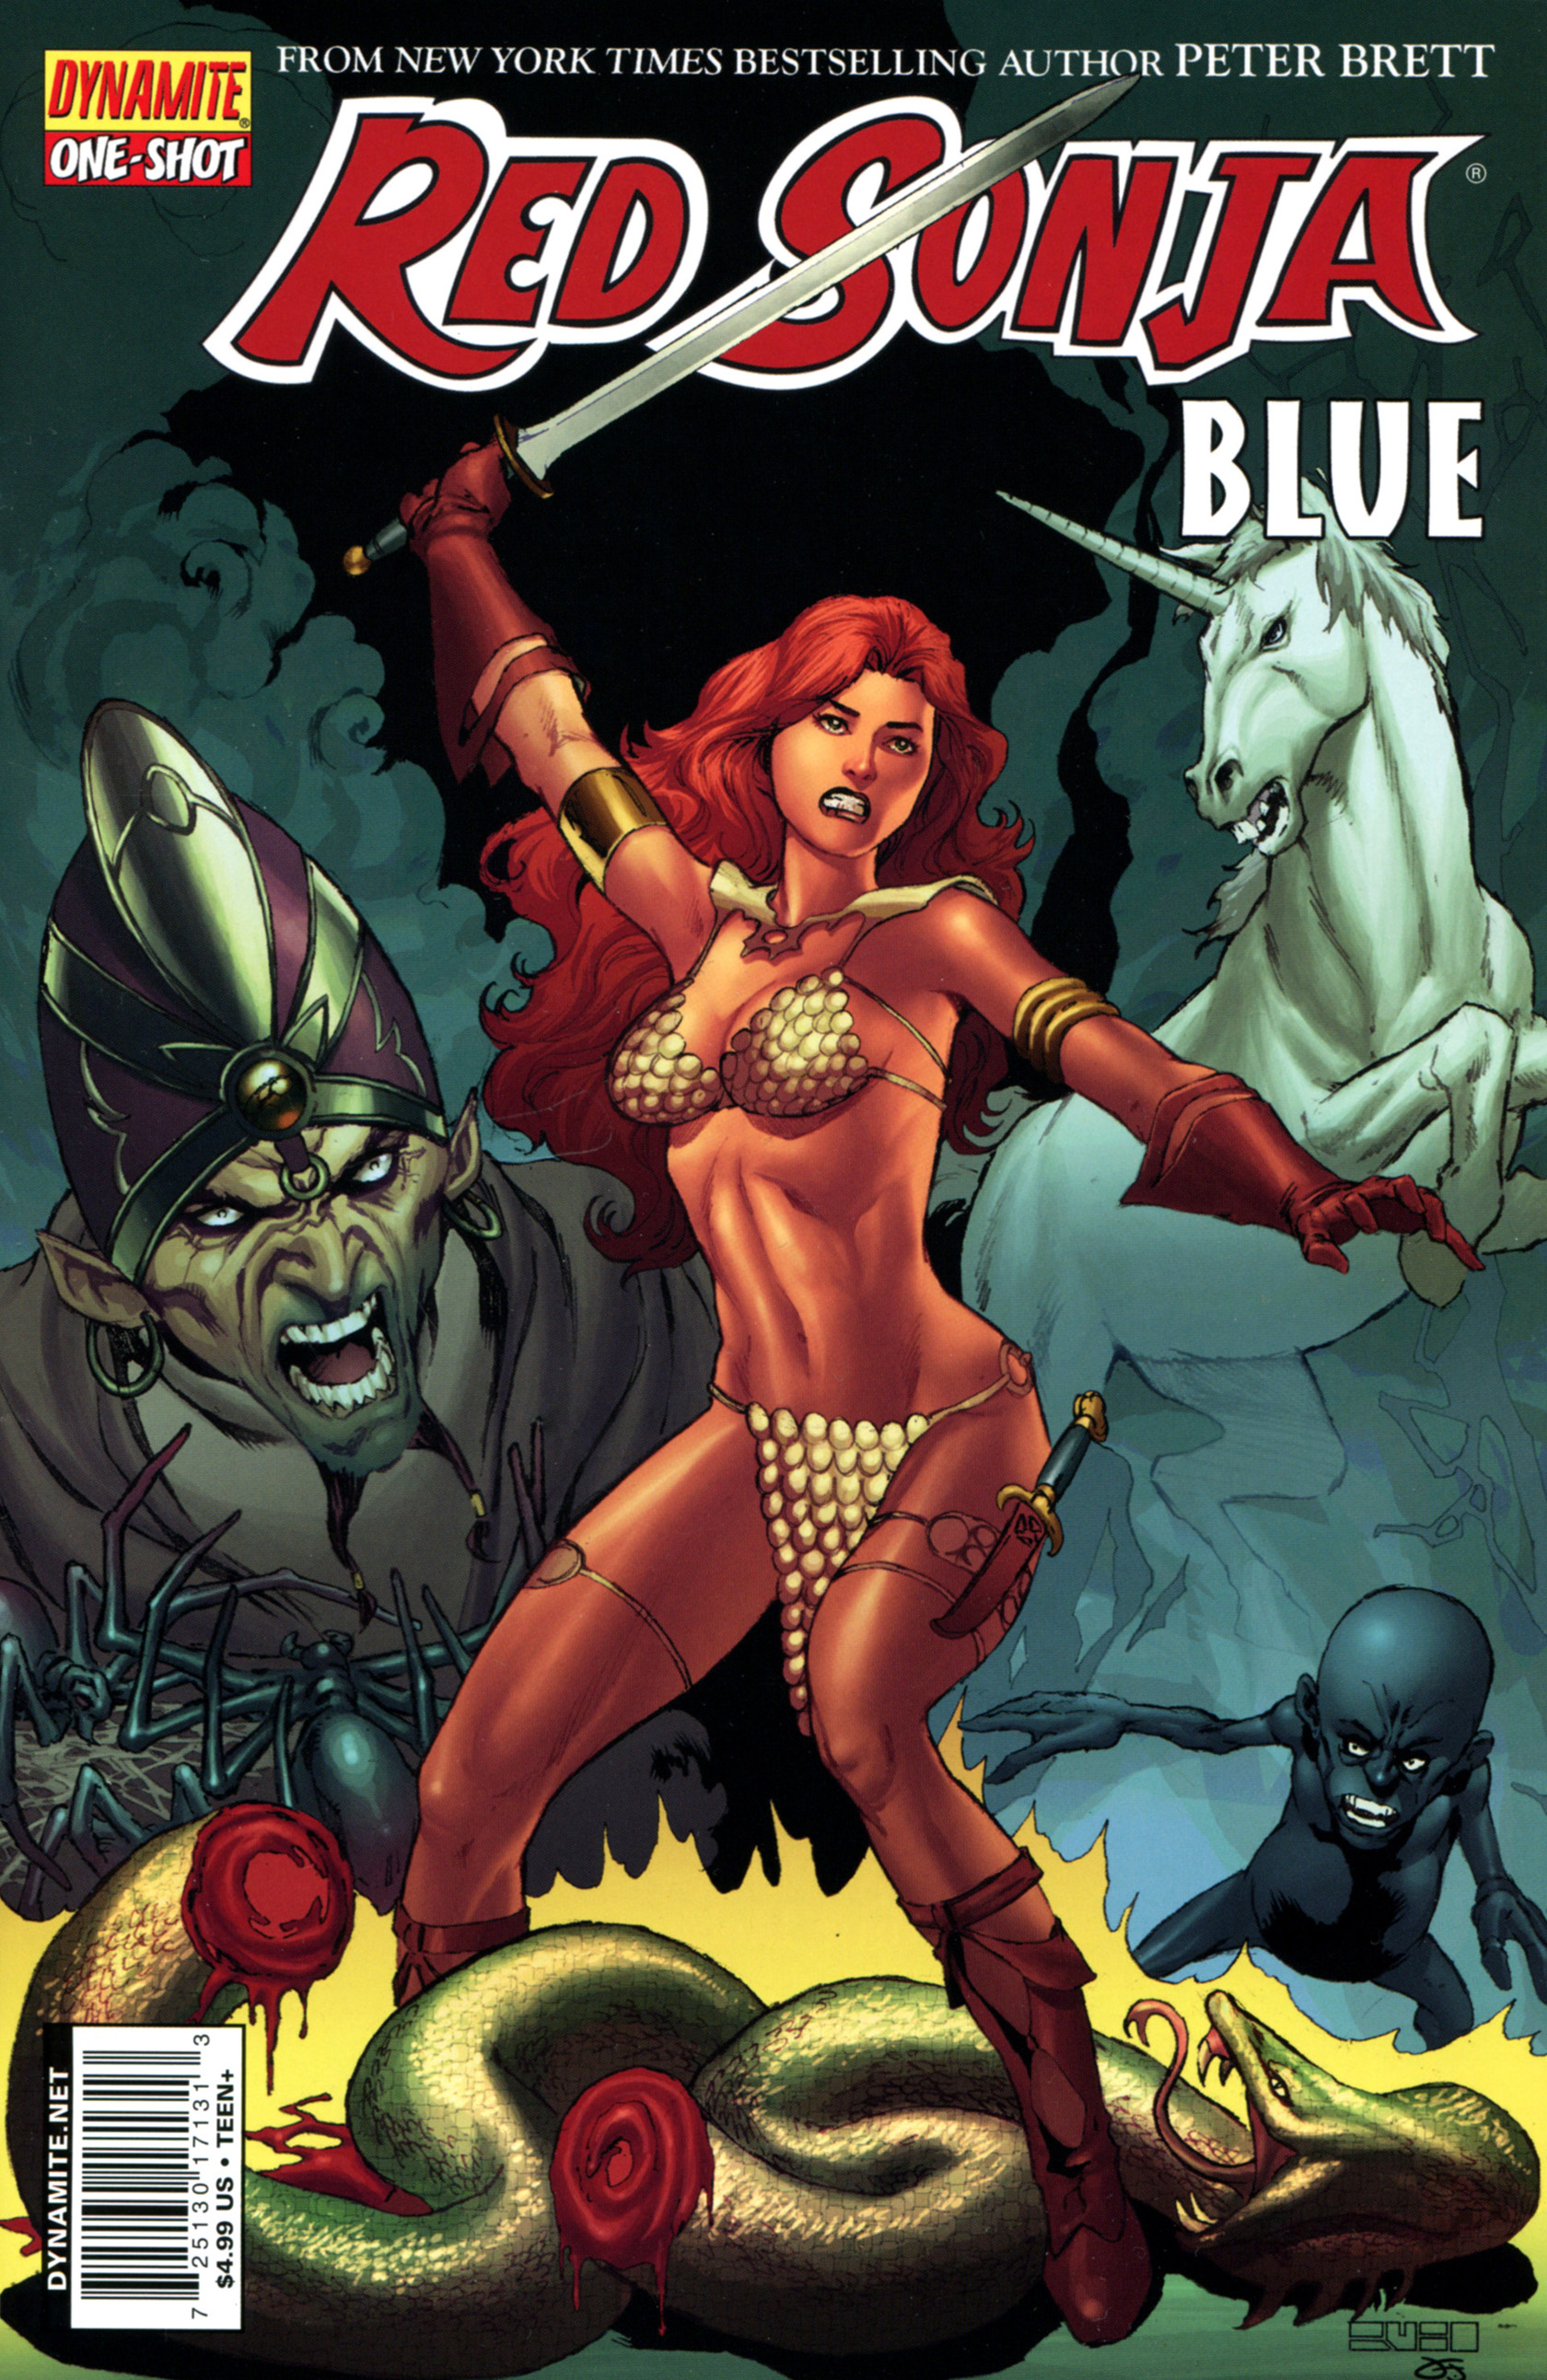 Read online Red Sonja: Blue comic -  Issue # Full - 2